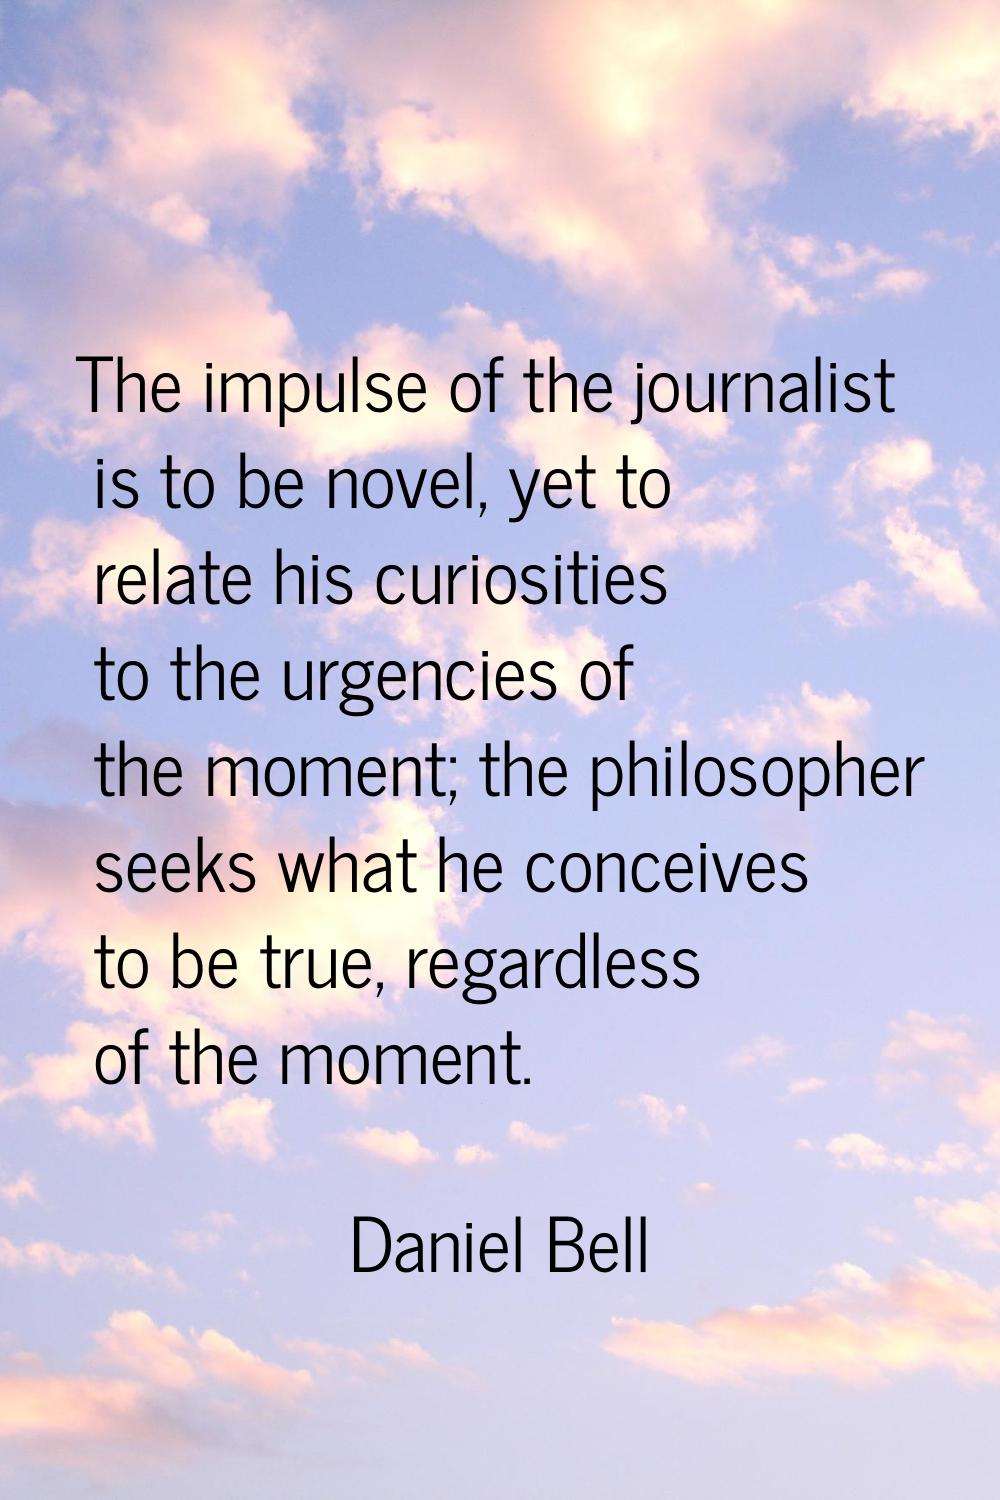 The impulse of the journalist is to be novel, yet to relate his curiosities to the urgencies of the